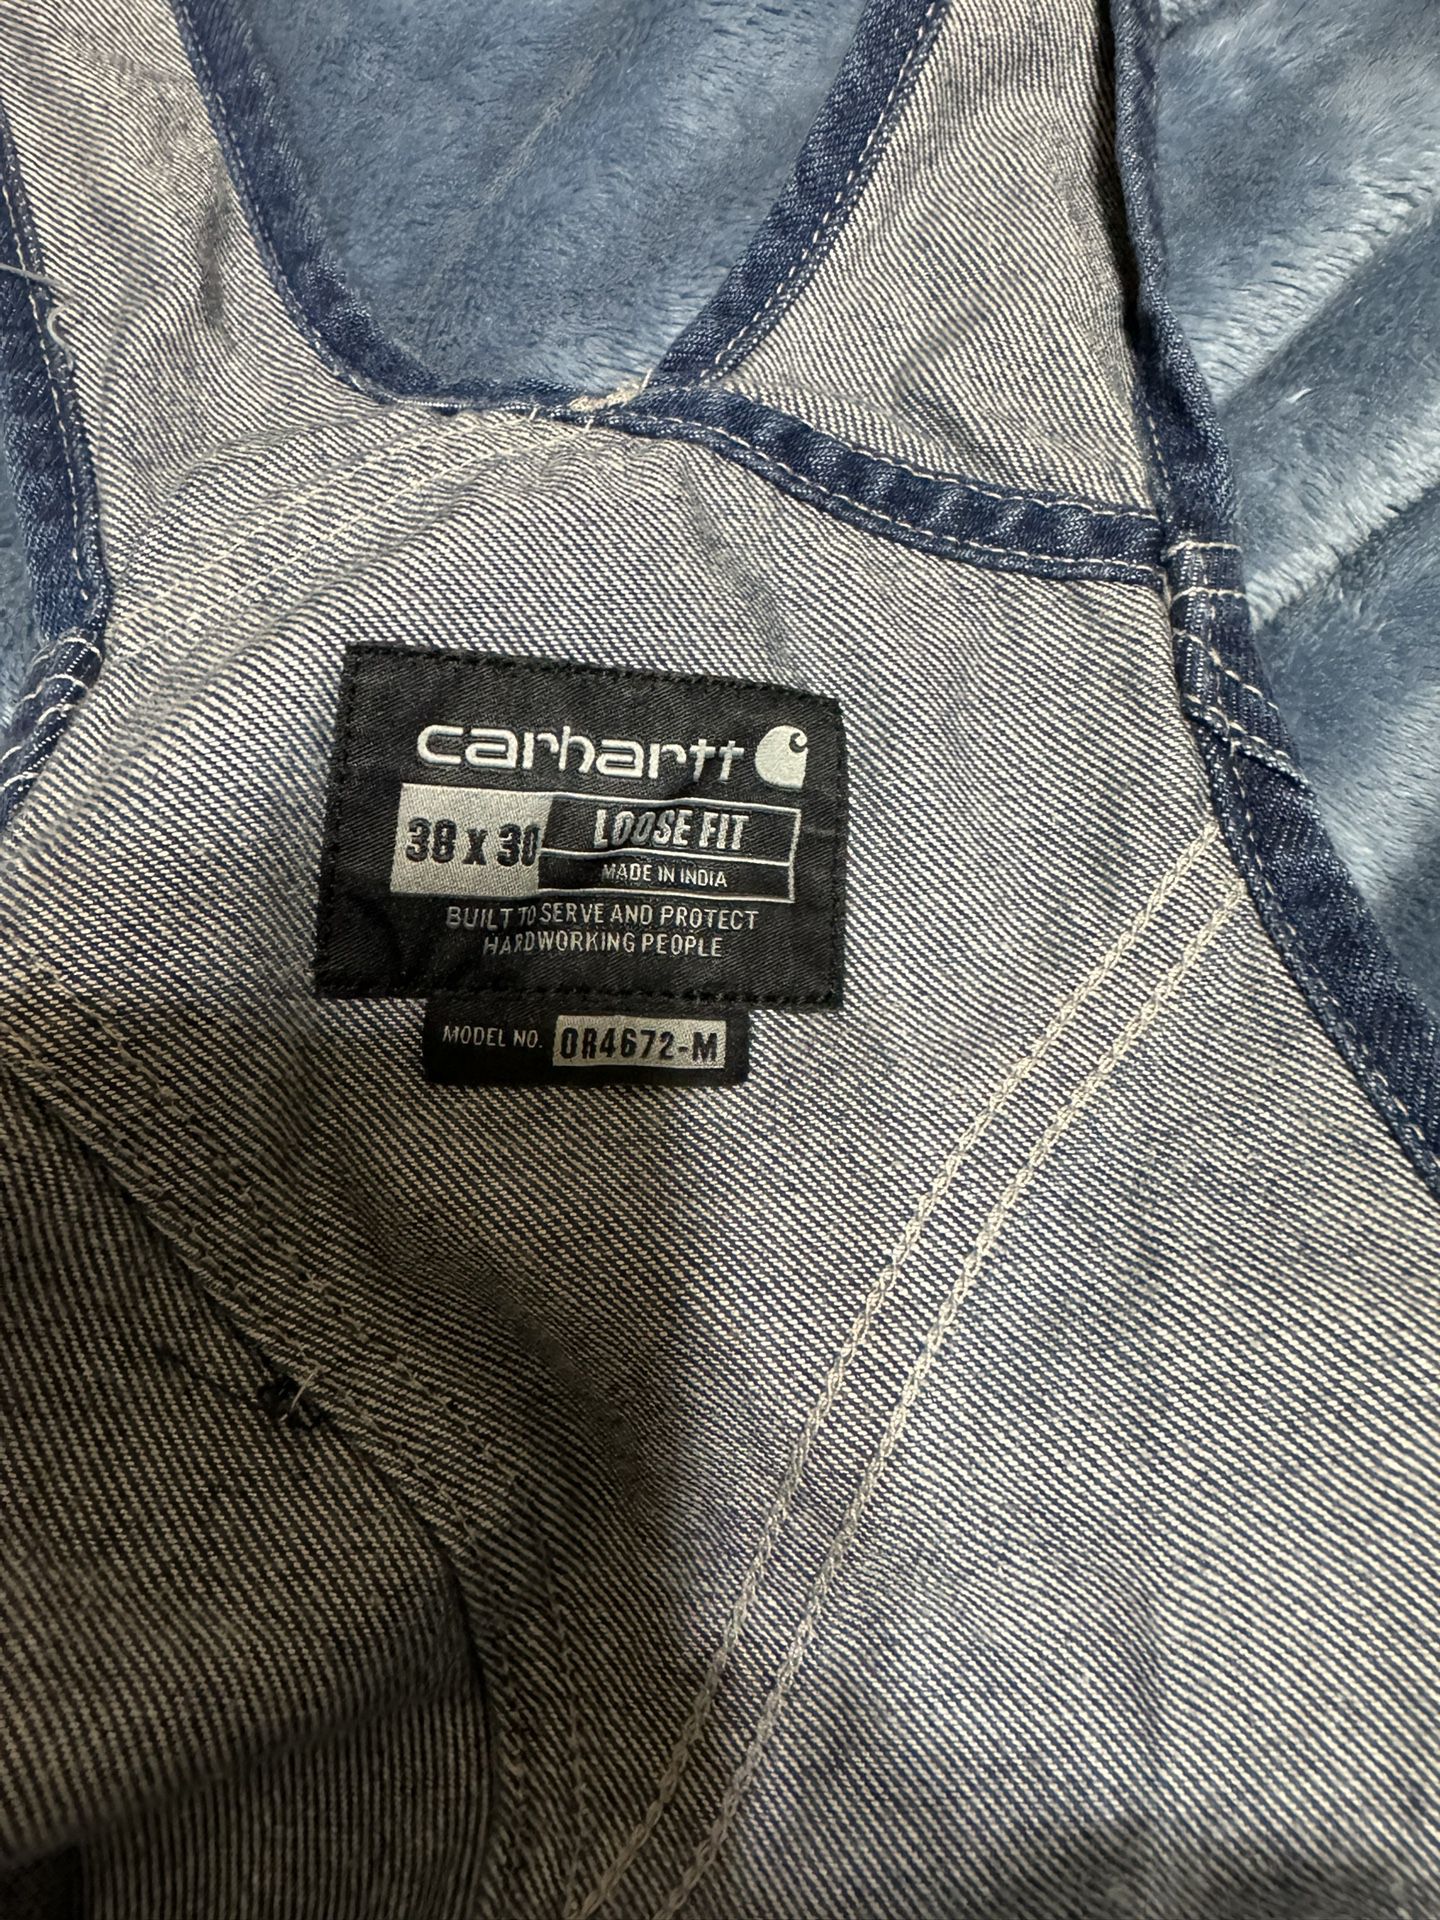 New Carthartt Denim Overalls- size 38x30 for Sale in Spring, TX - OfferUp